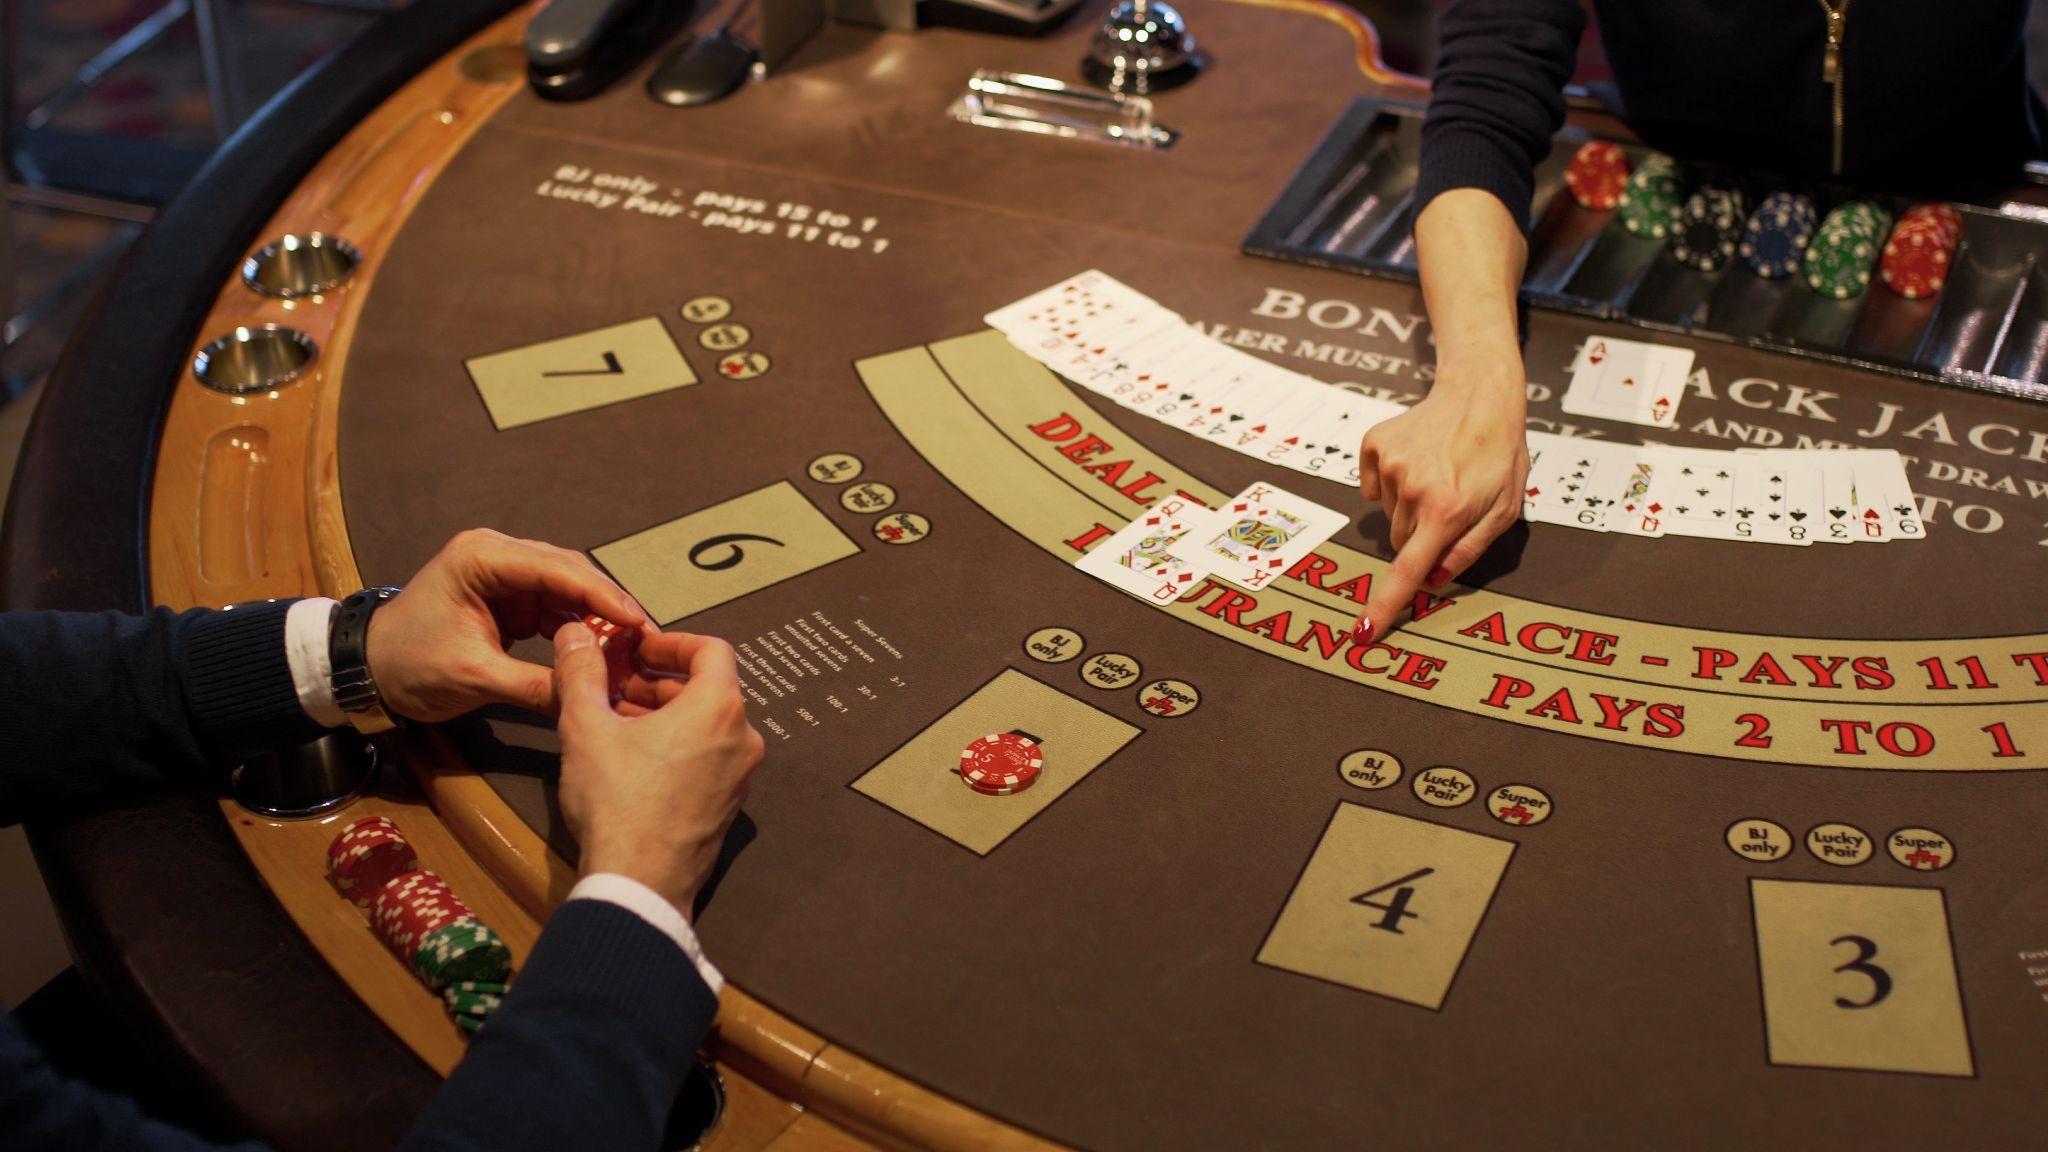 Image of a blackjack table where a hand is live